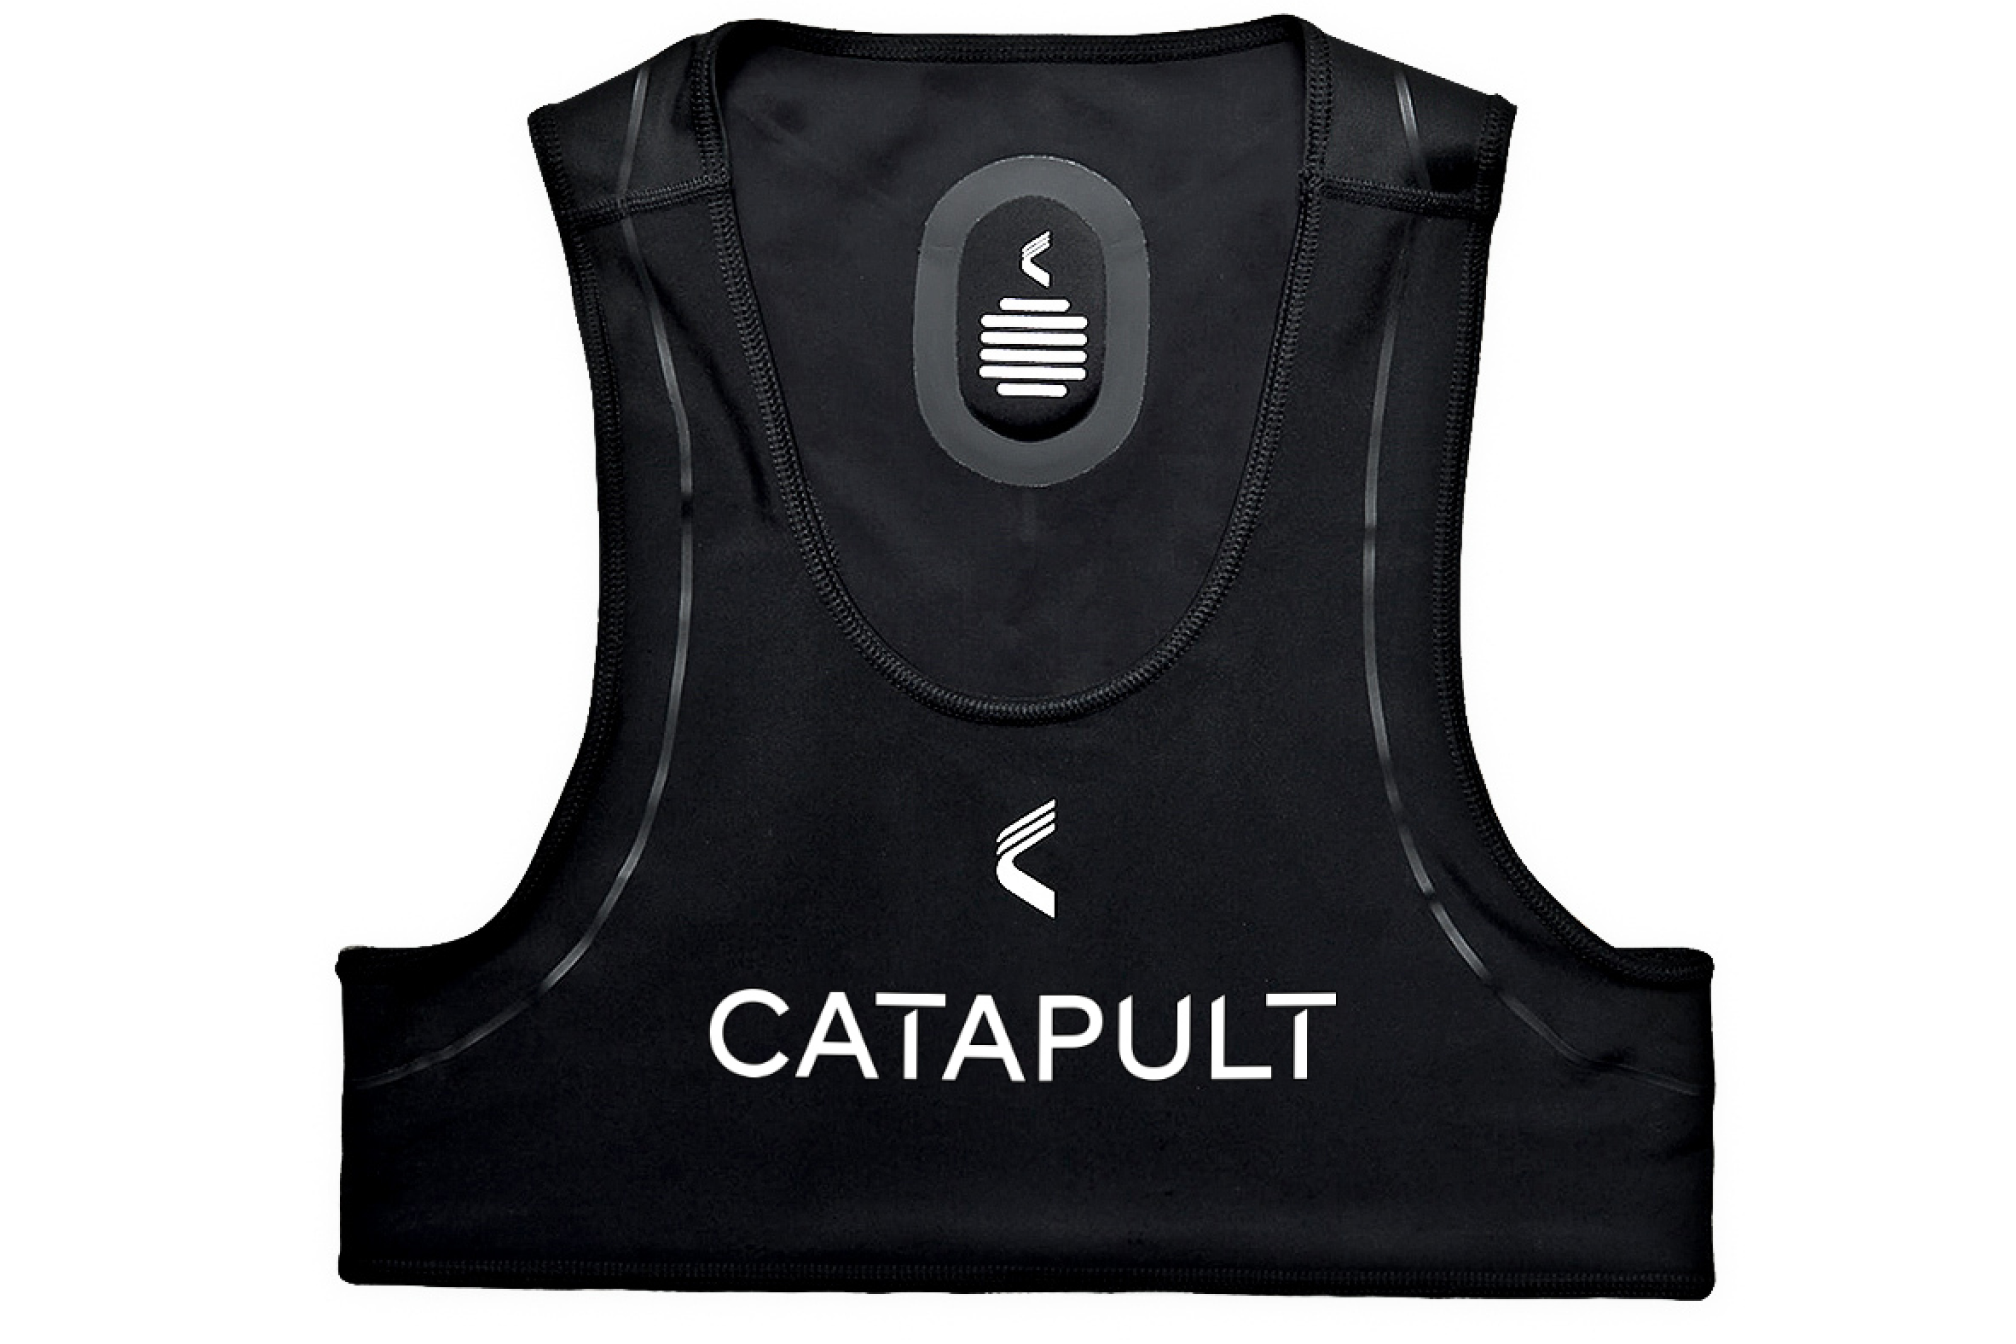 Best Selling Shopify Products on eu-store.catapultsports.com-2